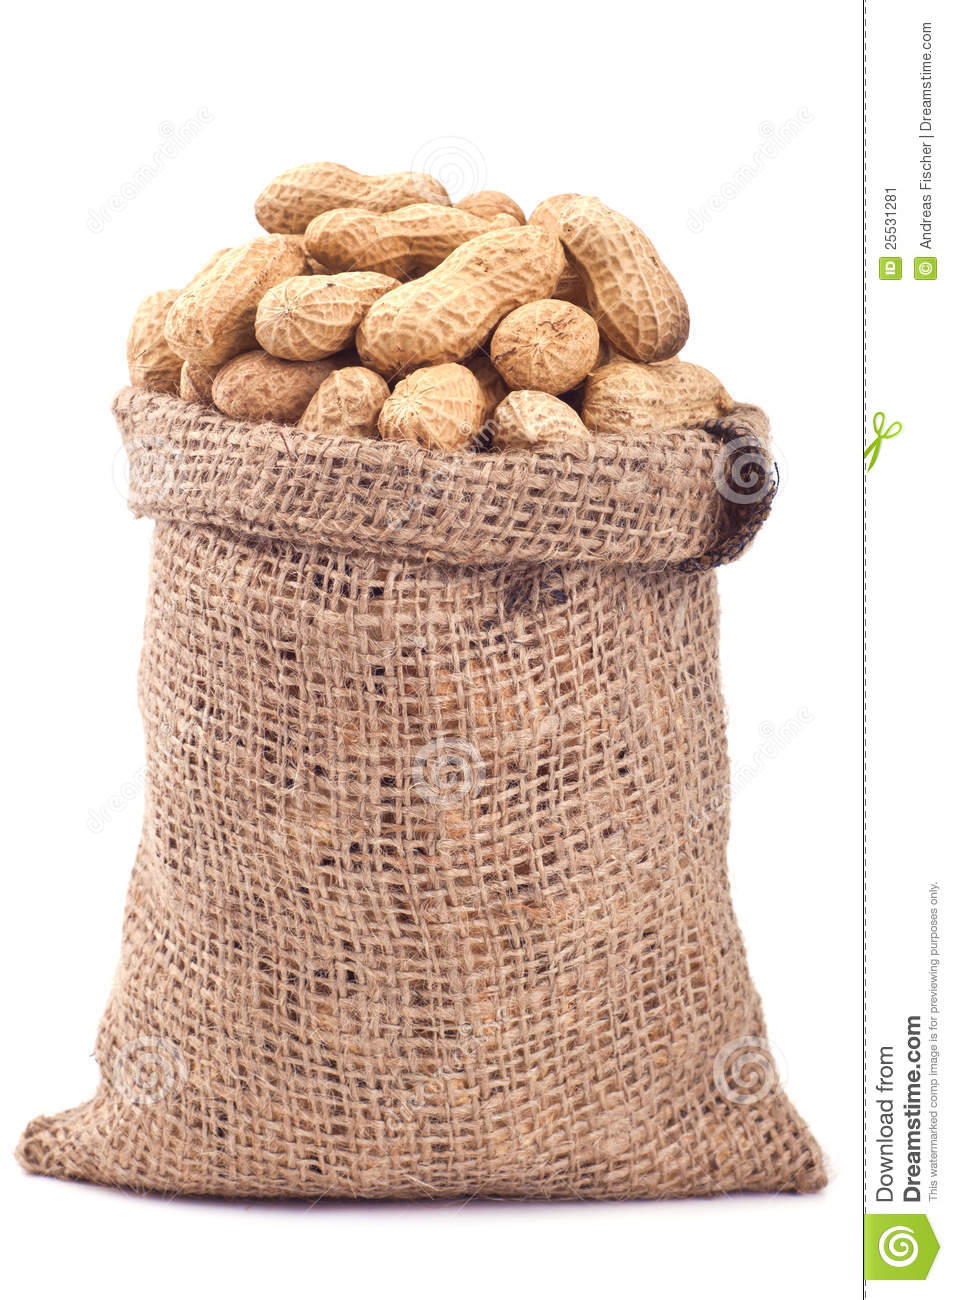 Peanut In A Bag Stock Image   Image  25531281